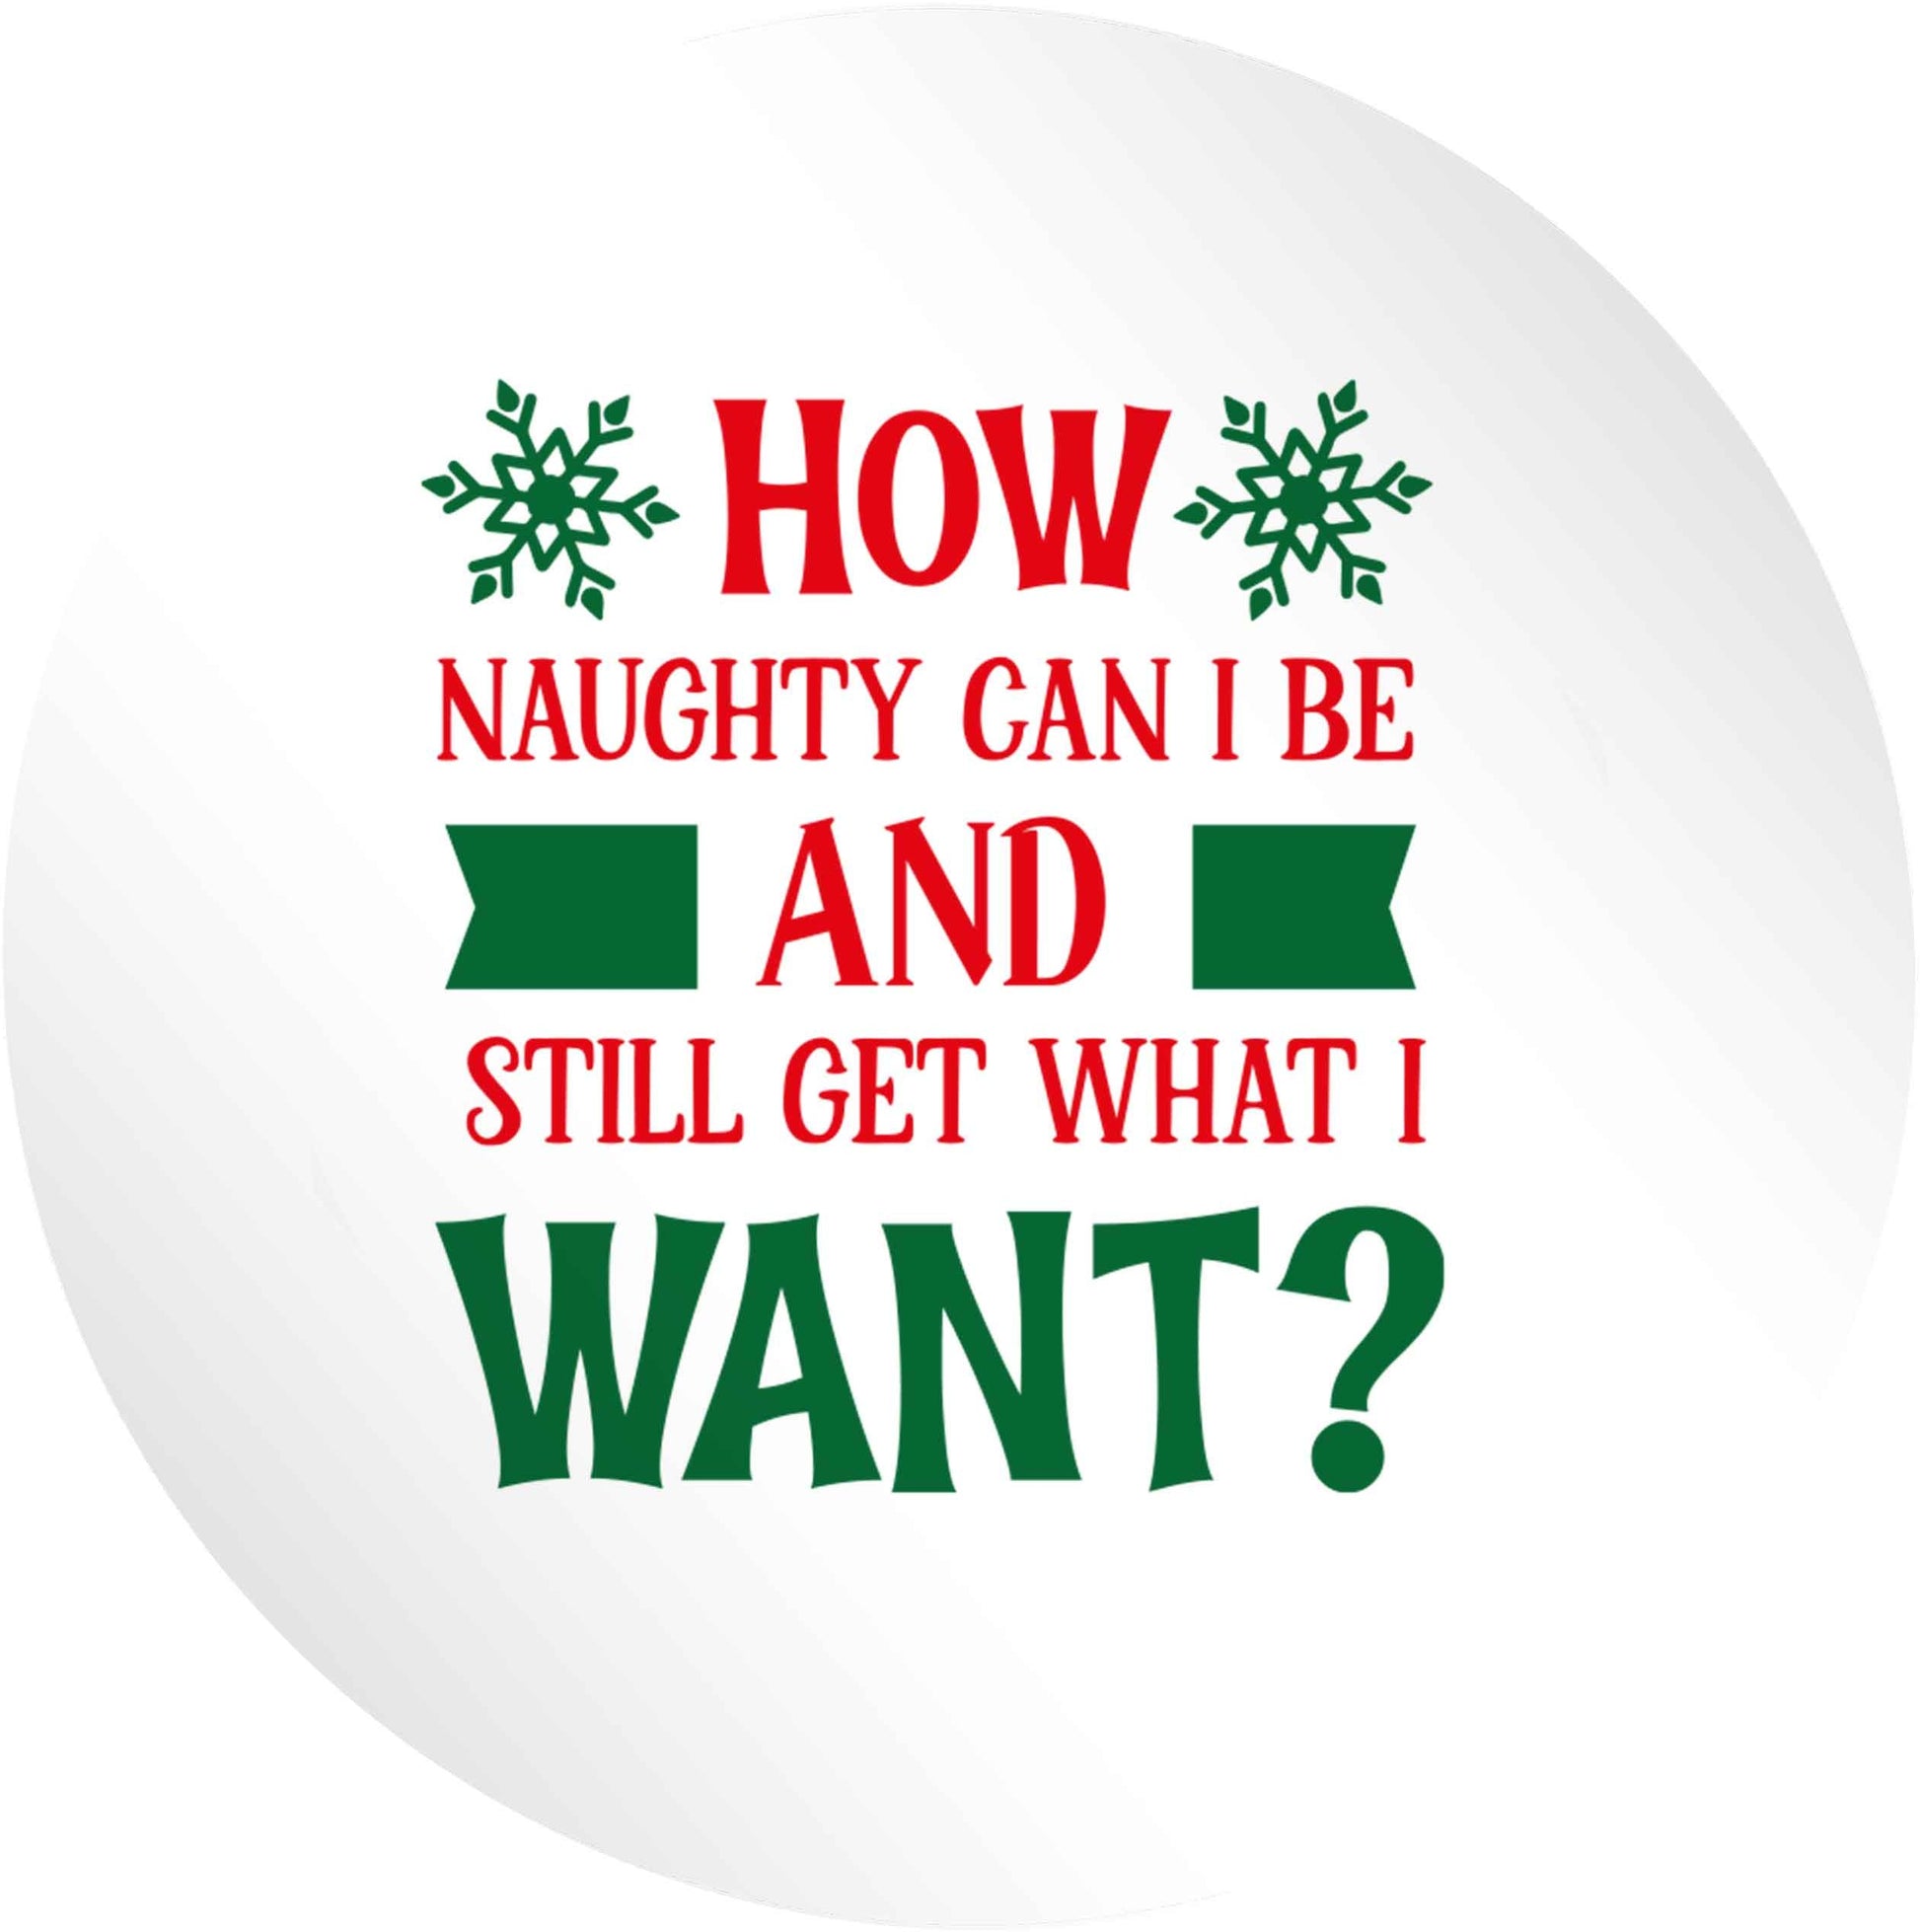 How naughty can I be and still get what I want? 24 @ 45mm matt circle stickers